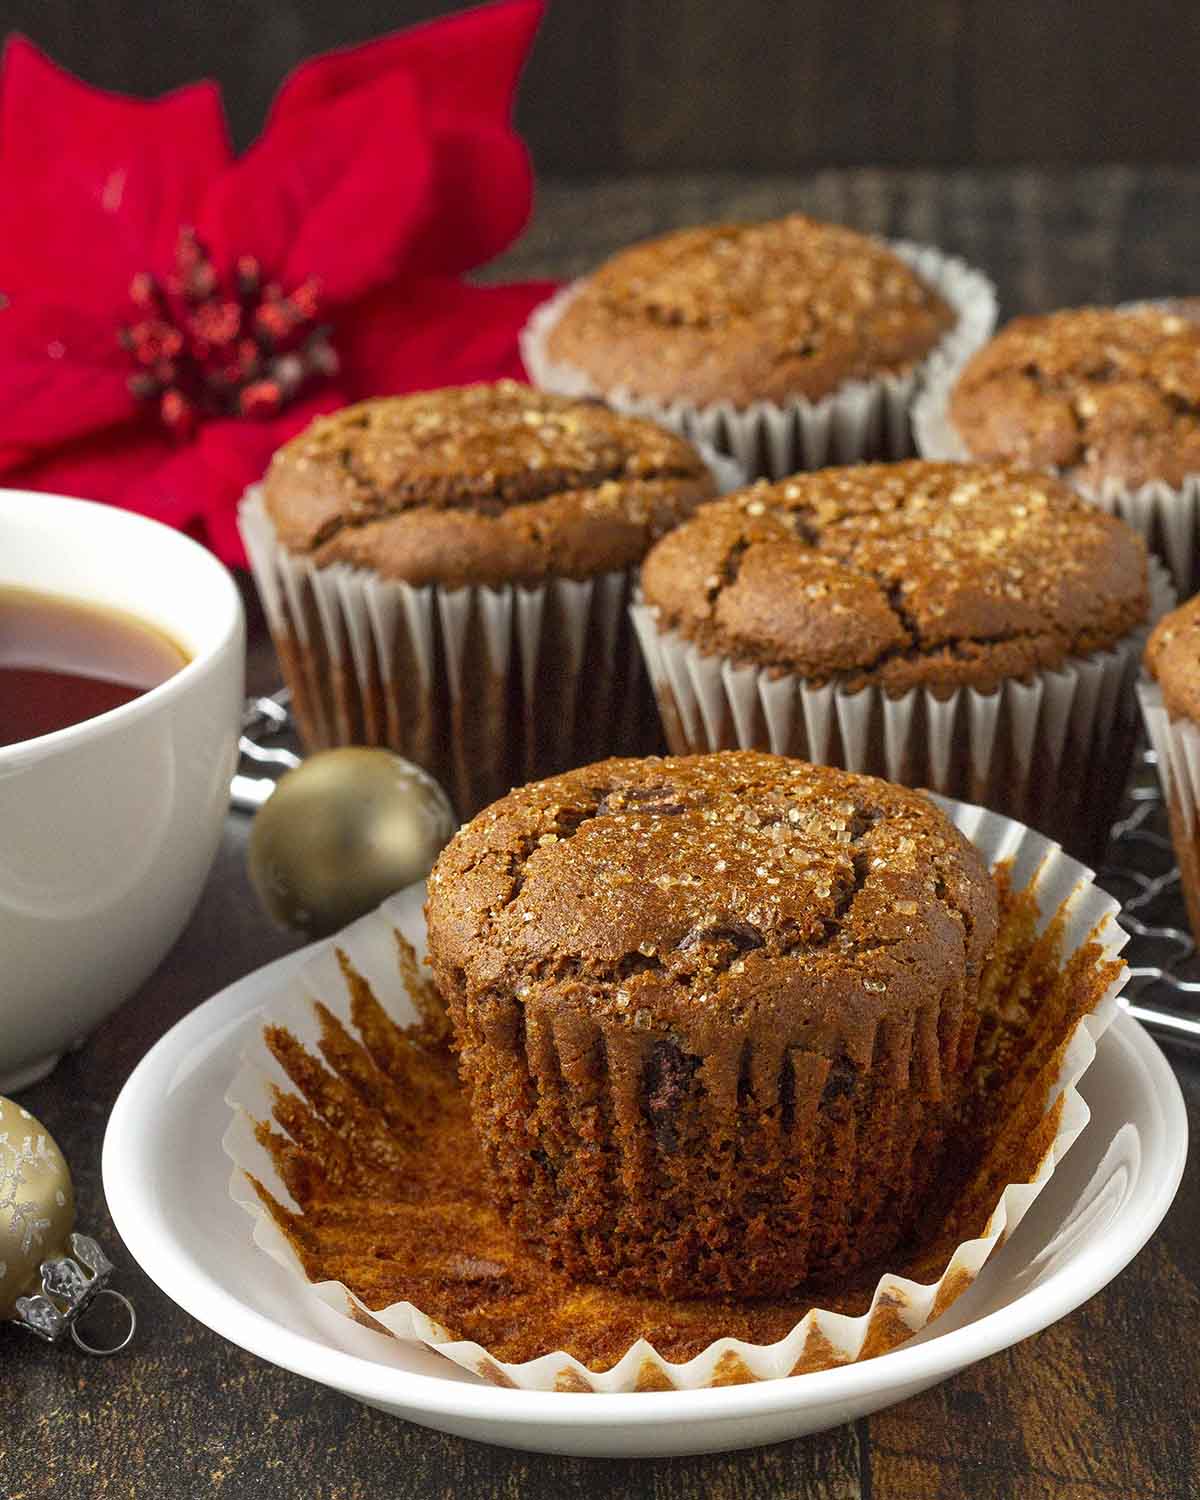 A gingerbread muffin on a plate, the muffin wrapper has been peeled away.